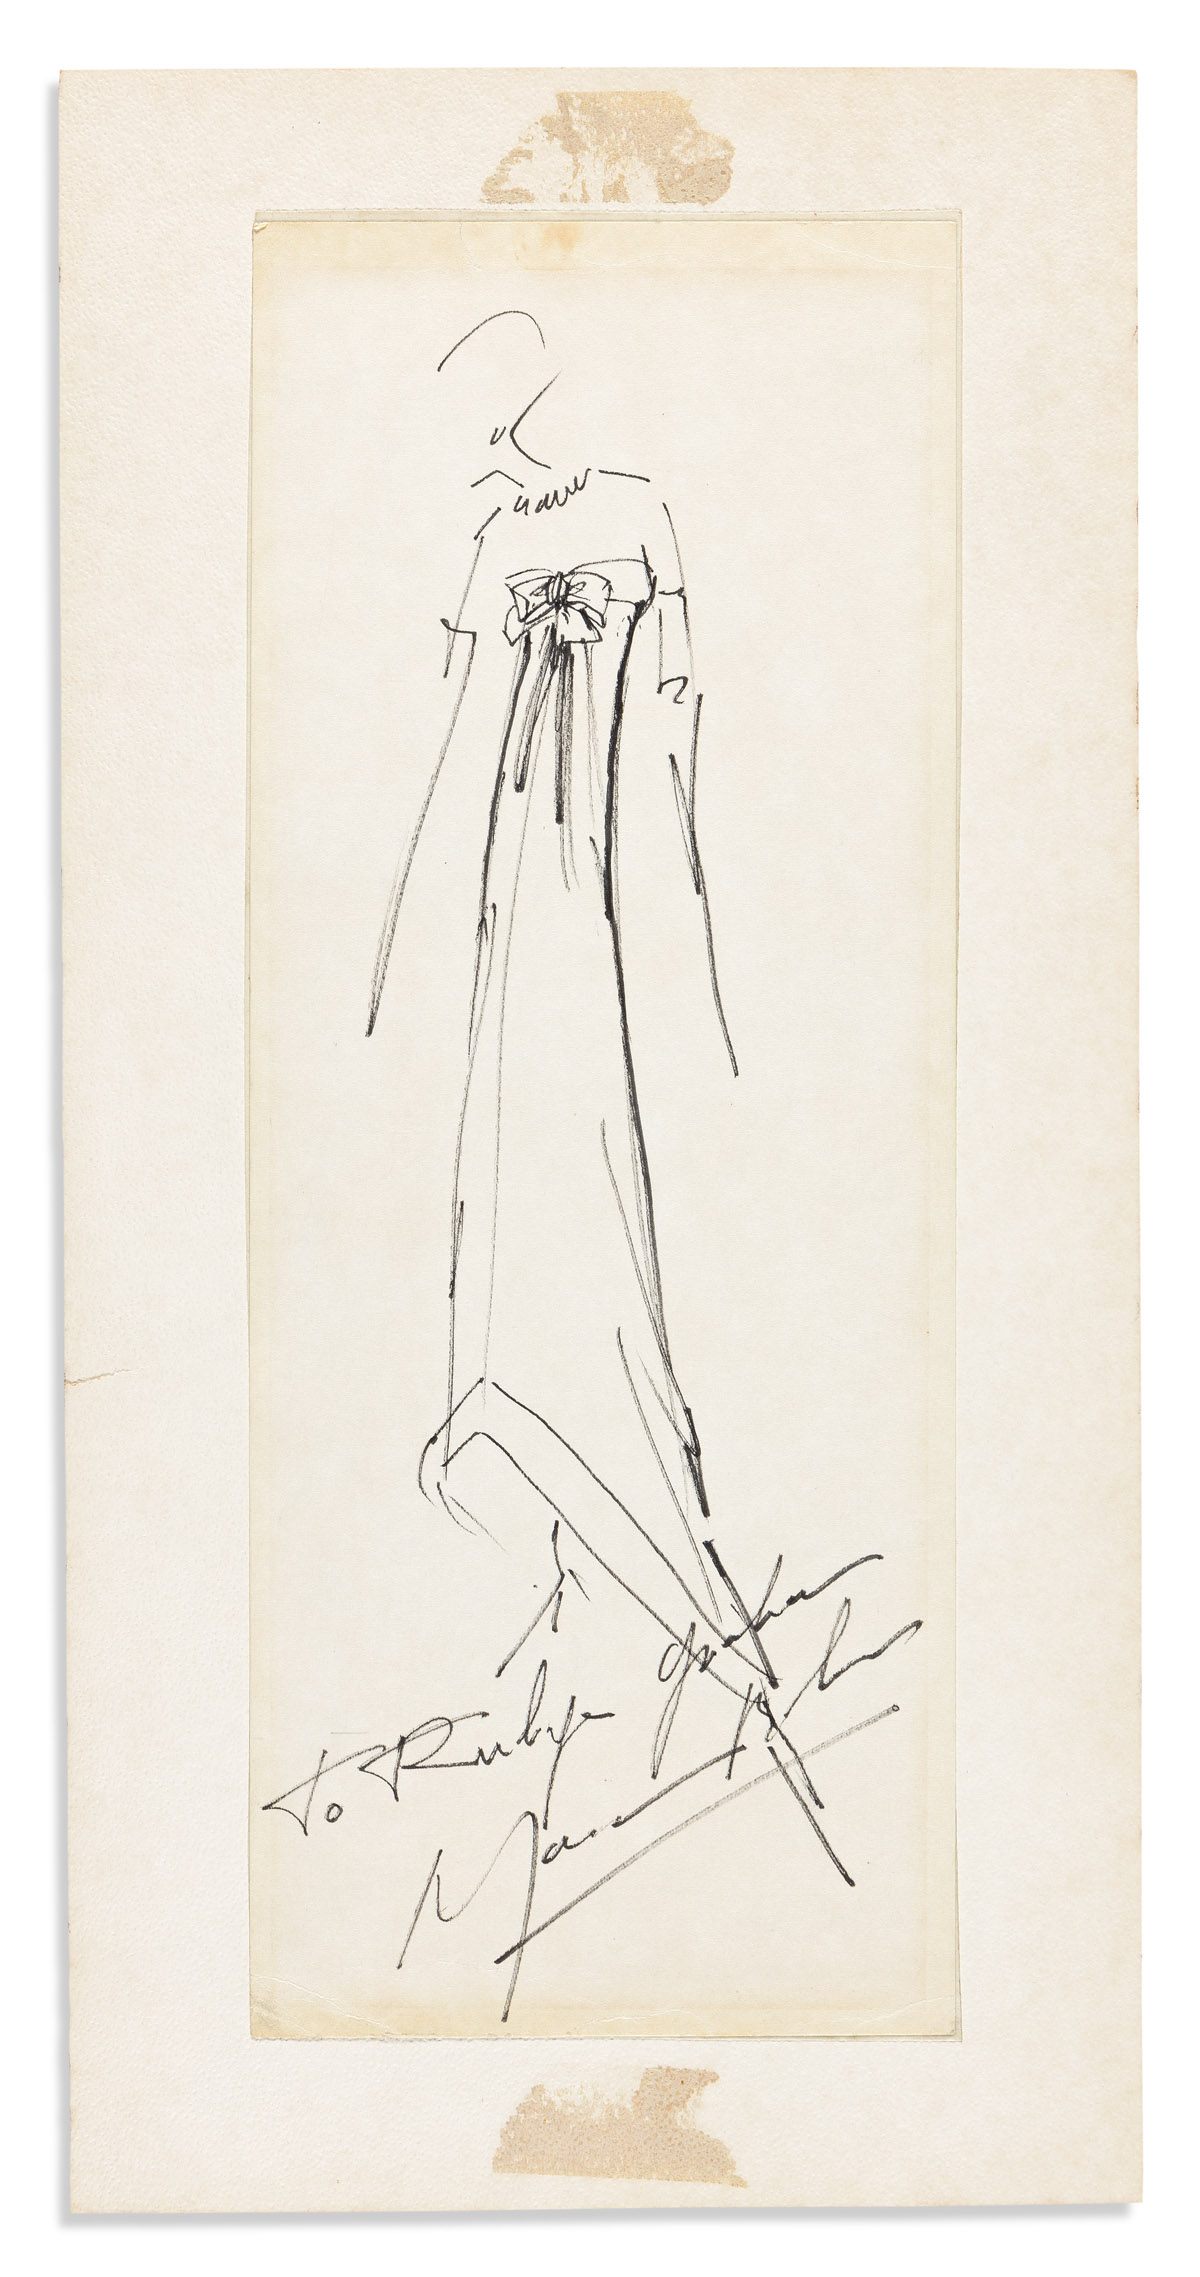 (FASHION.) BOHAN, MARC. Ink drawing, Signed and Inscribed, To Rubye Graham, sketched design for a gown.